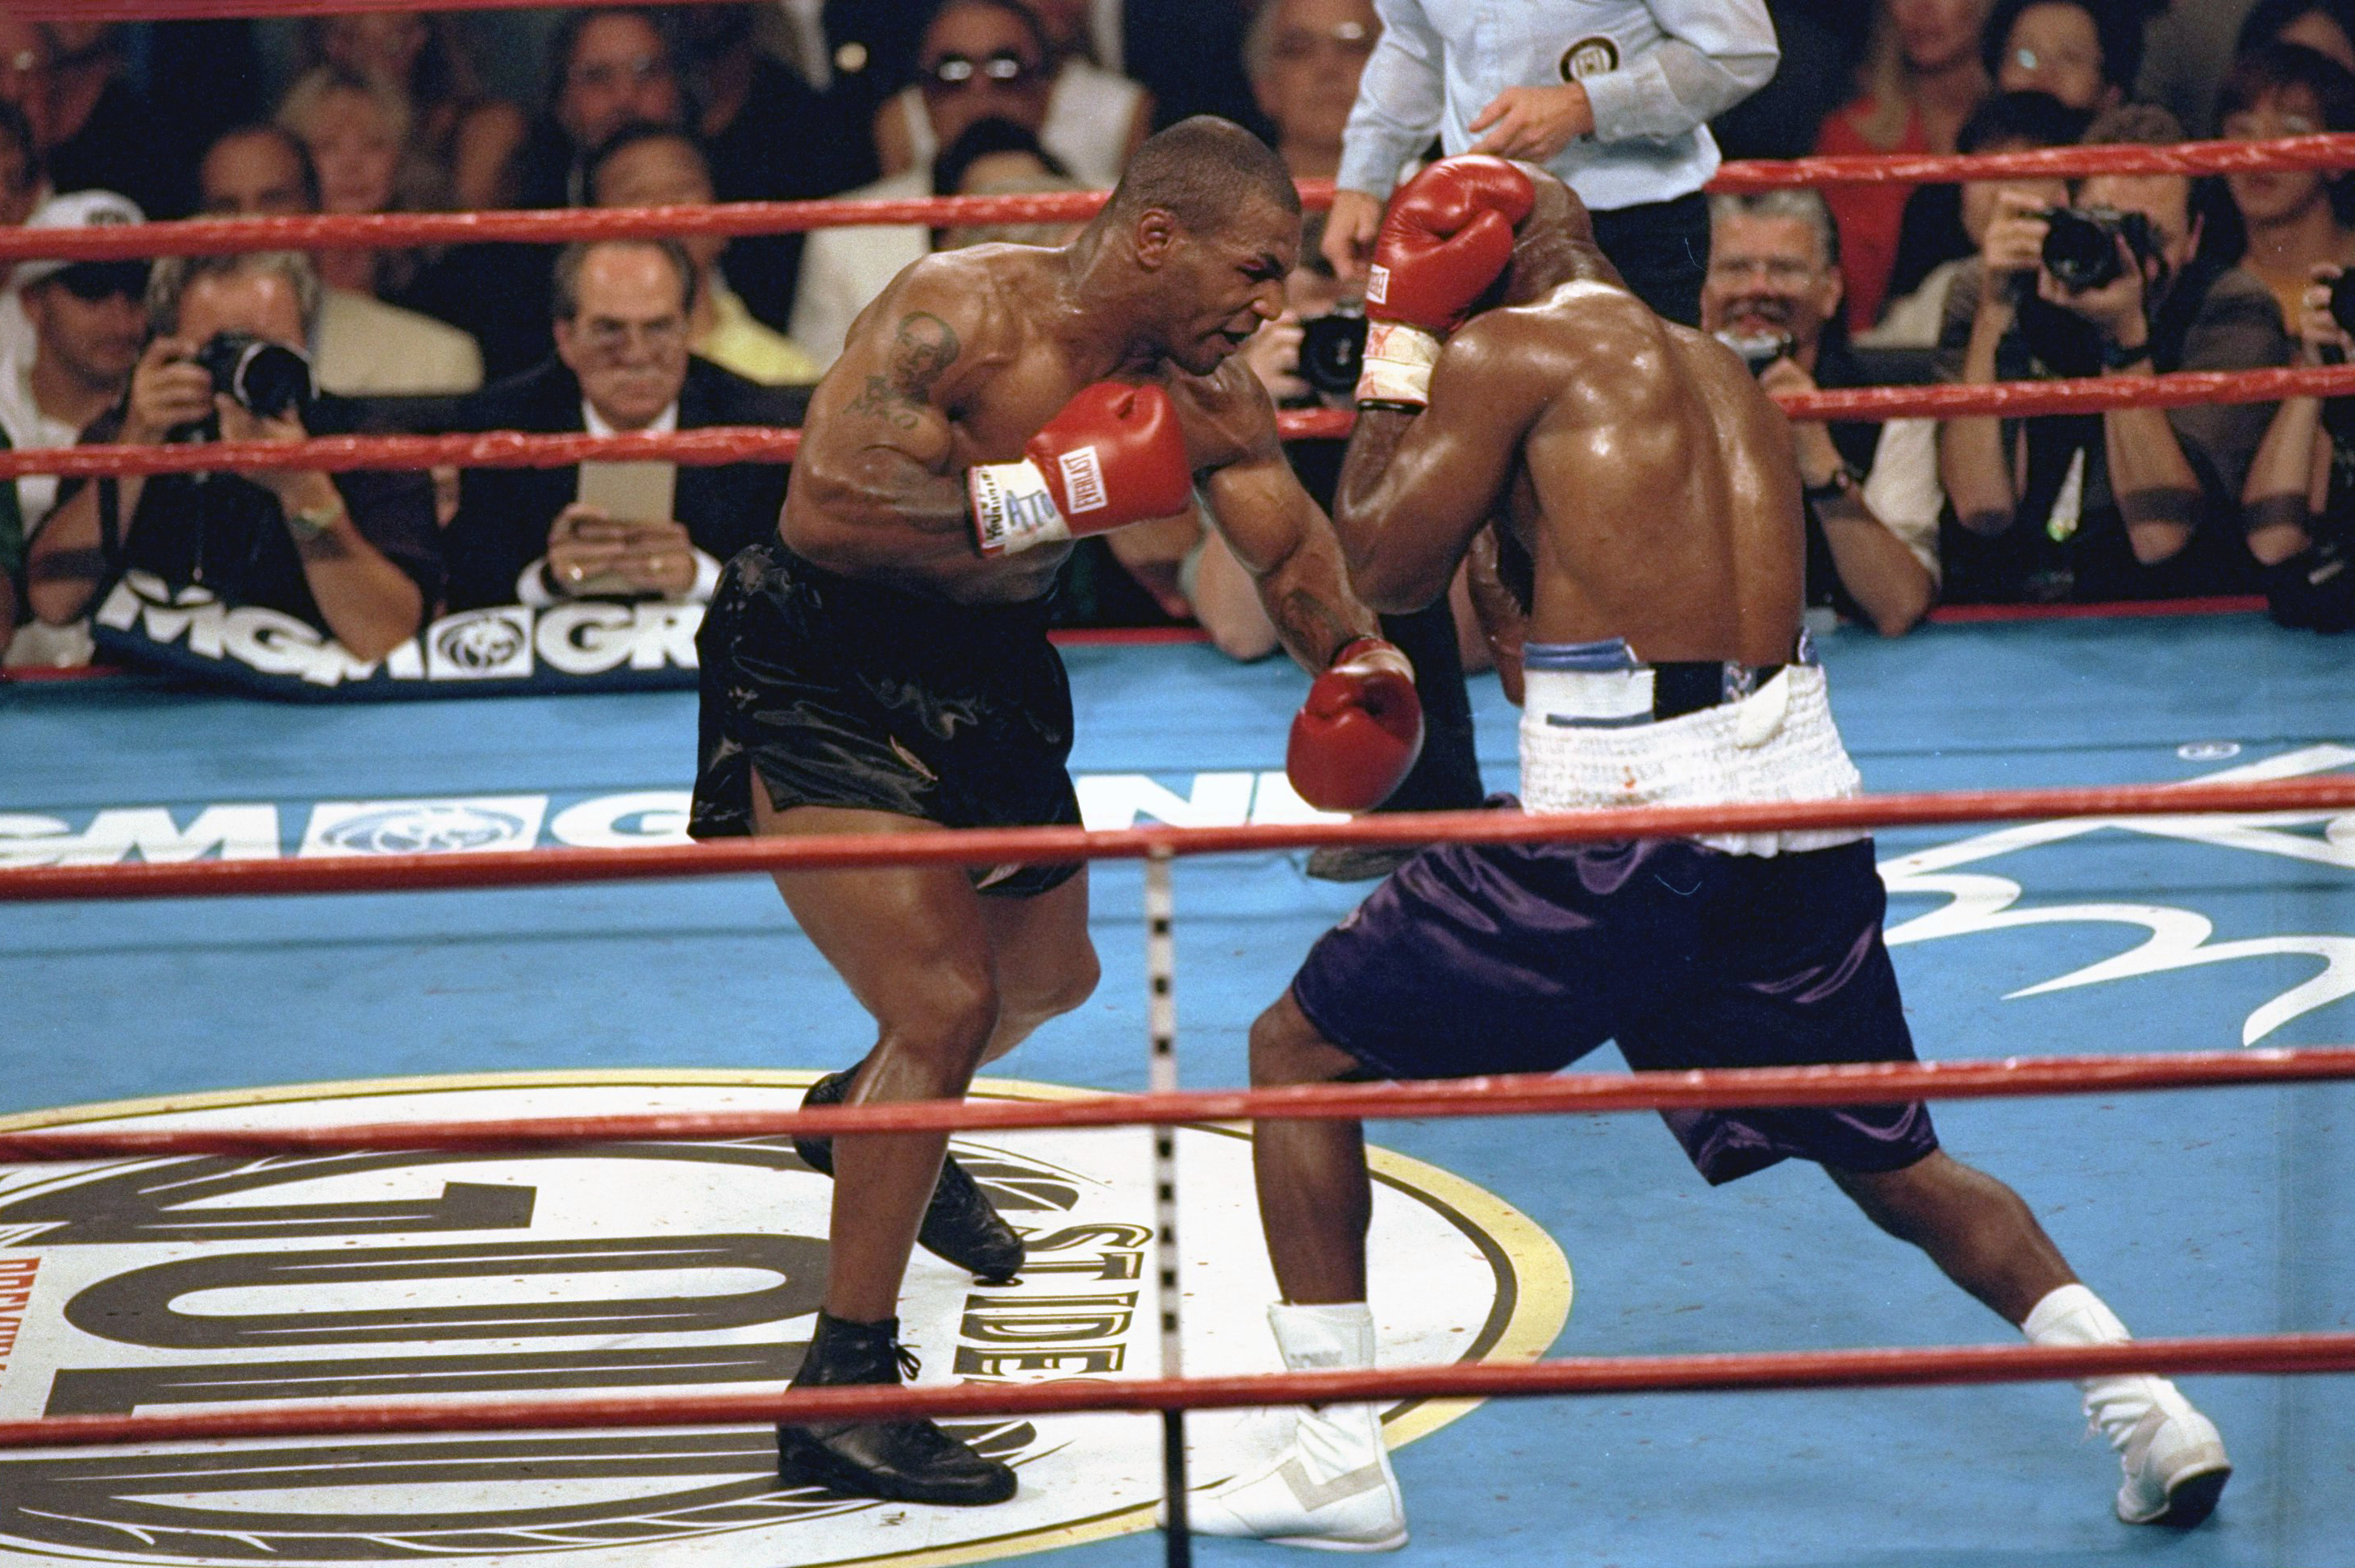 Mike Tyson and Evander Holyfield fighting at MGM Grand in Las Vegas in June 1997